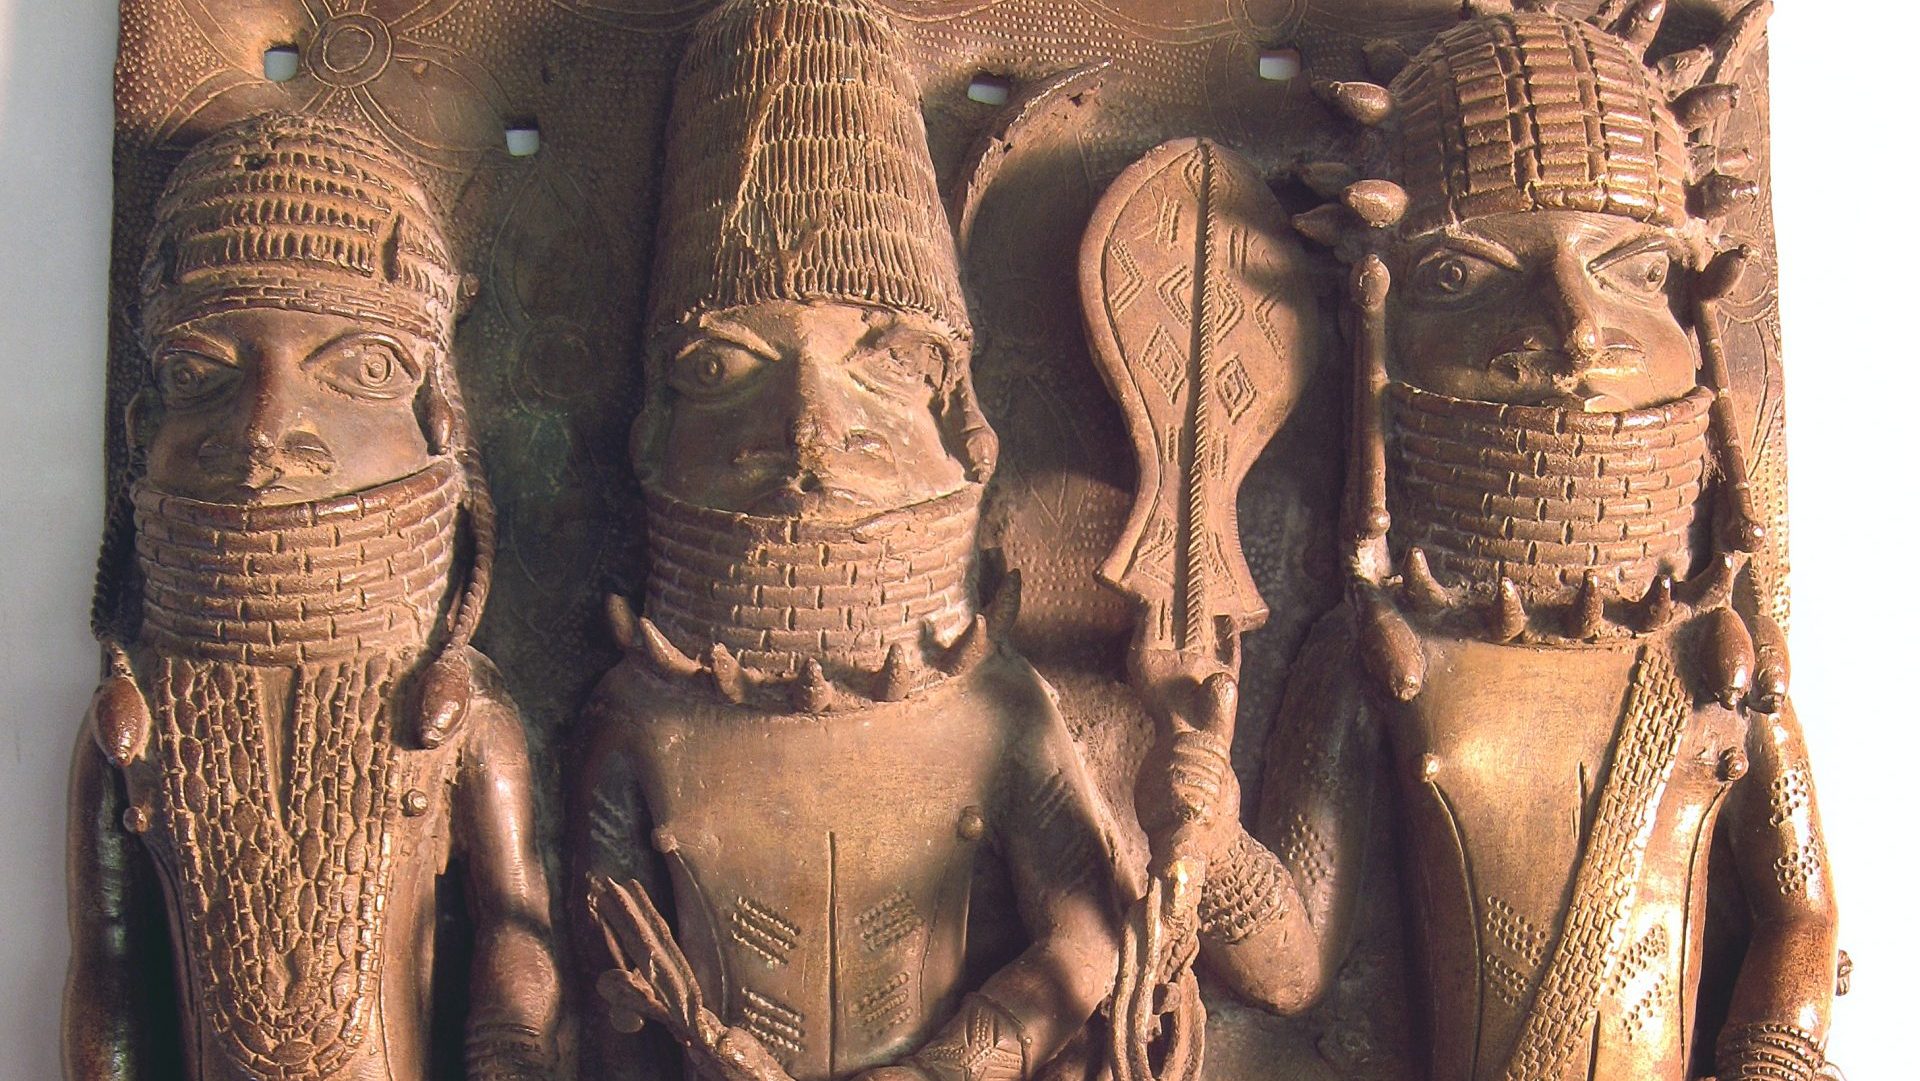 Detail from a relief plaque from the kingdom of Benin